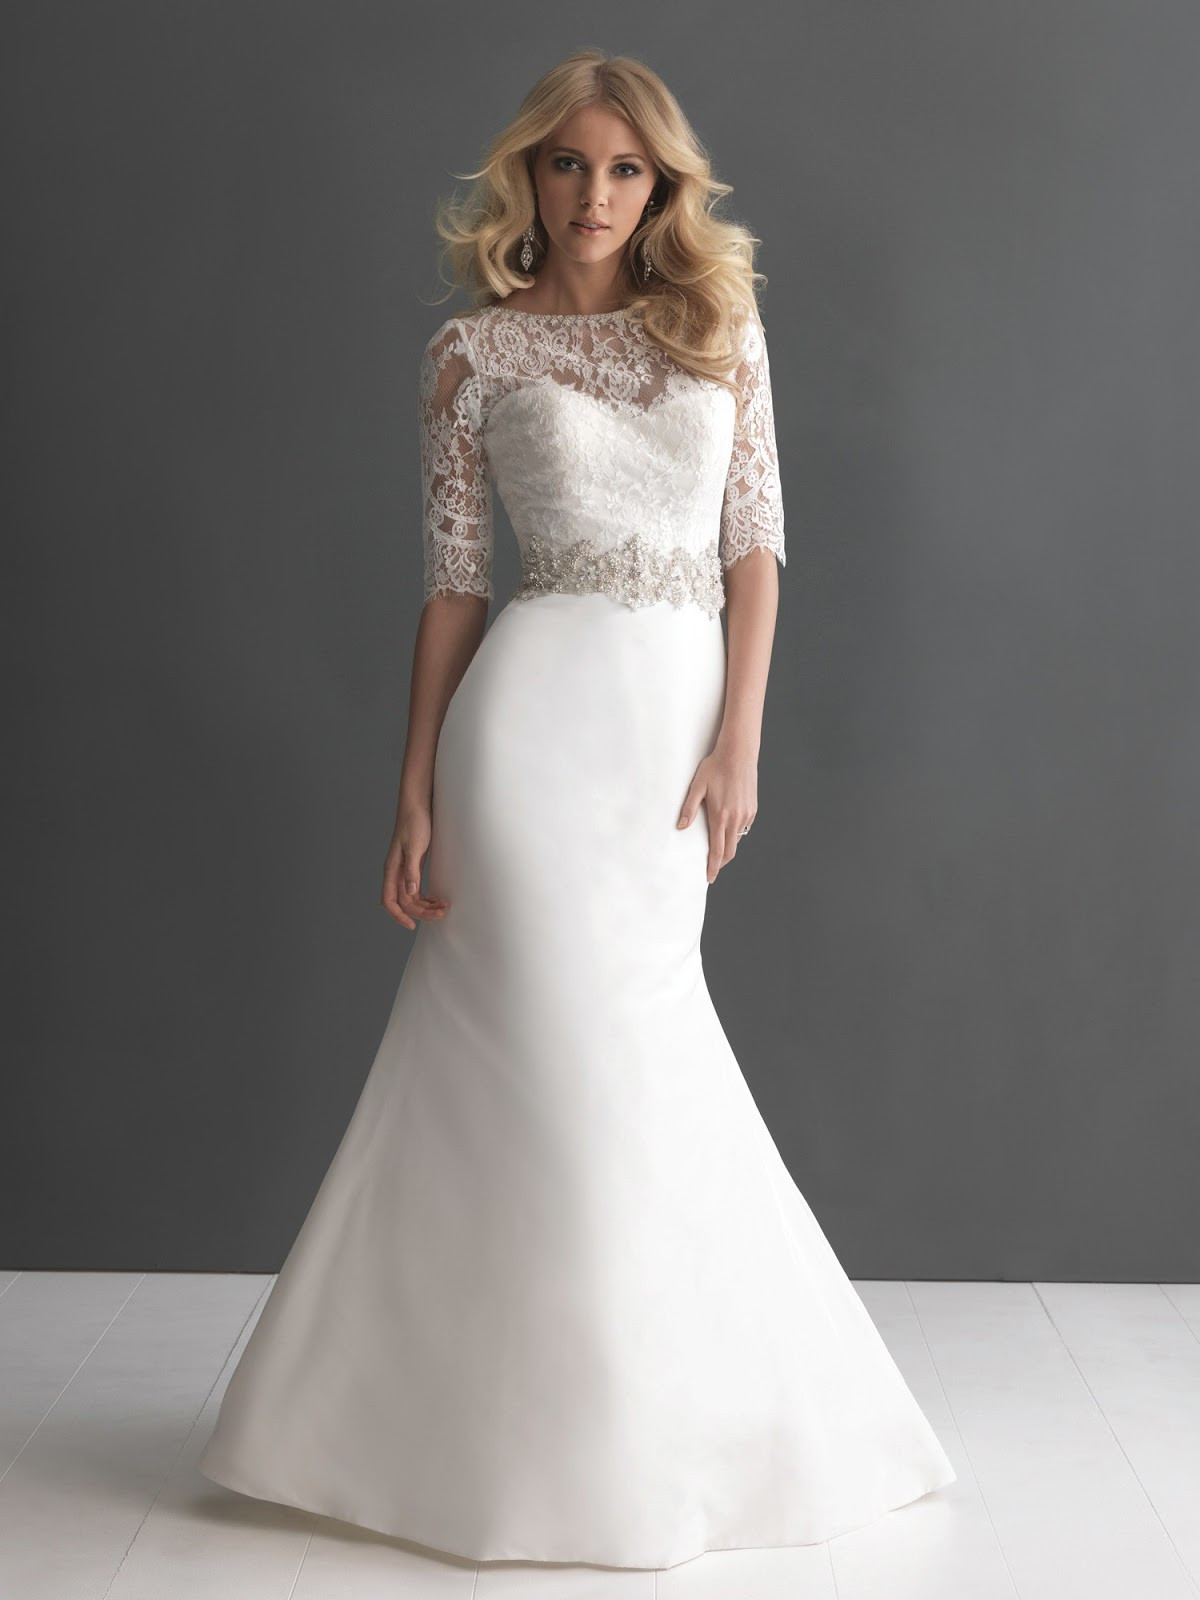 Images Of Wedding Gowns
 DressyBridal Allure Wedding Dresses Fall 2013 Collection